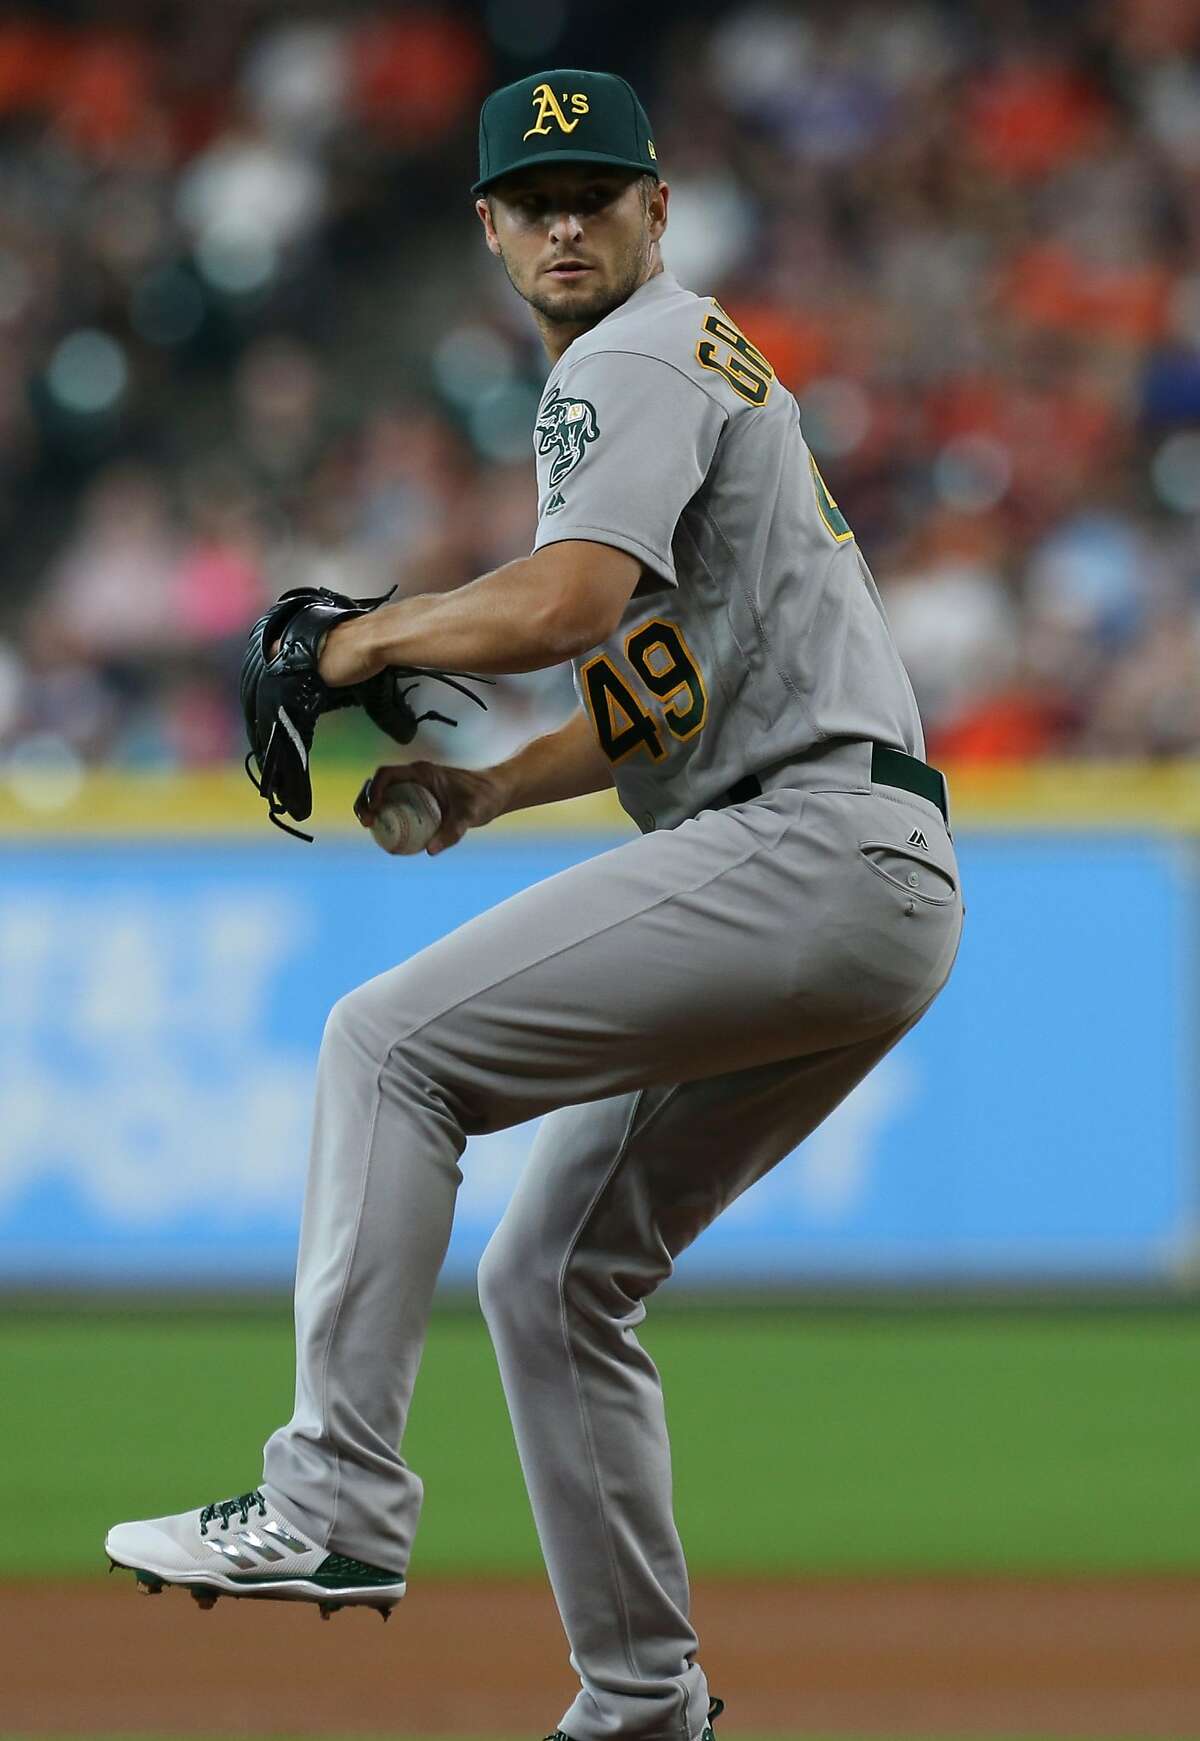 Oakland Athletics starting pitcher Kendall Graveman (49) pitches during the first inning of the game at Minute Maid Park Saturday, Aug. 19, 2017, in Houston. ( Yi-Chin Lee / Houston Chronicle )